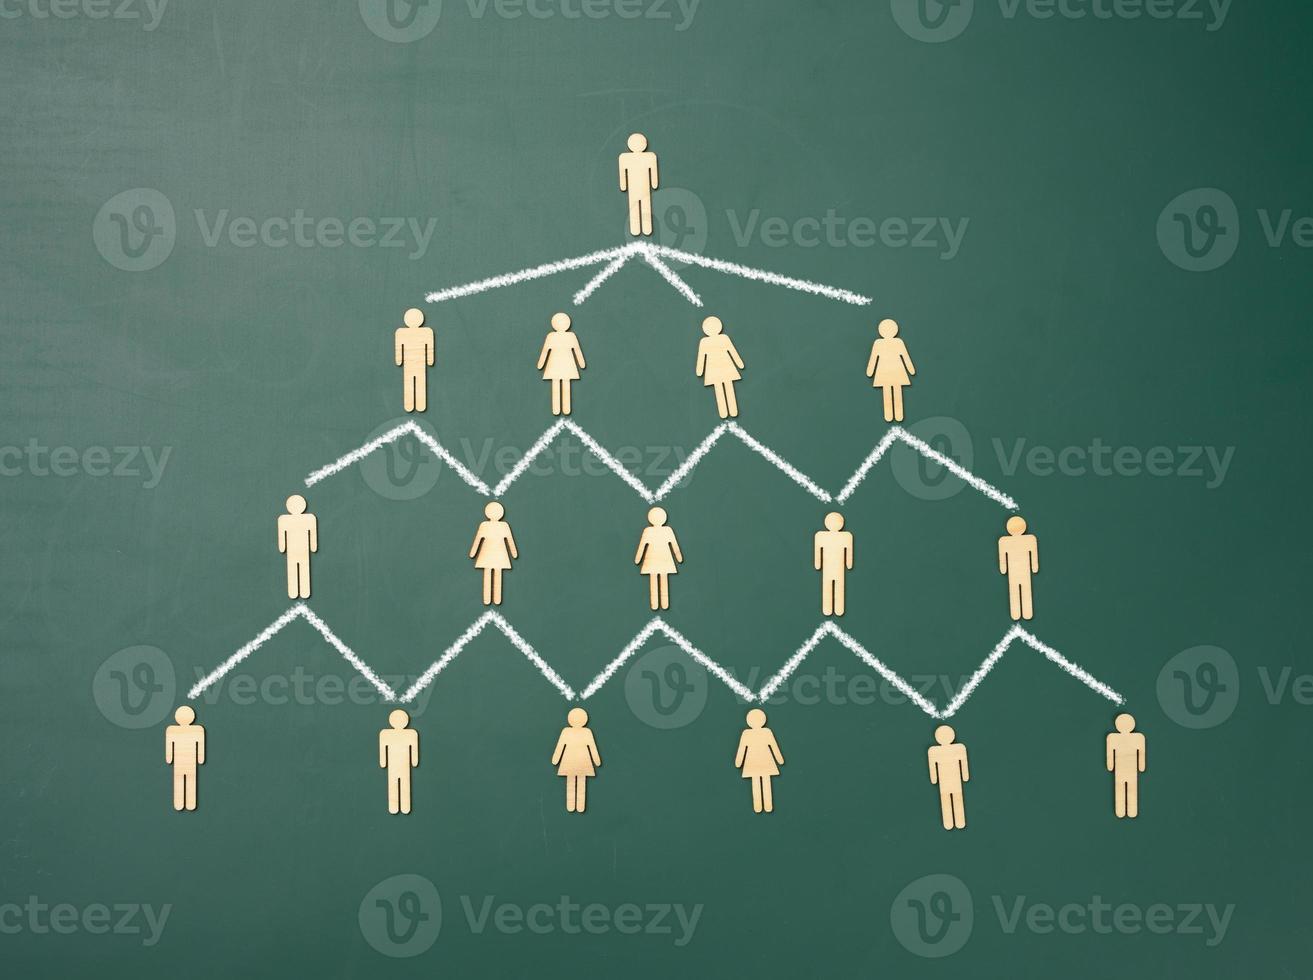 wooden figures on a green chalkboard background, hierarchical organizational structure of management, effective management model in the organization photo